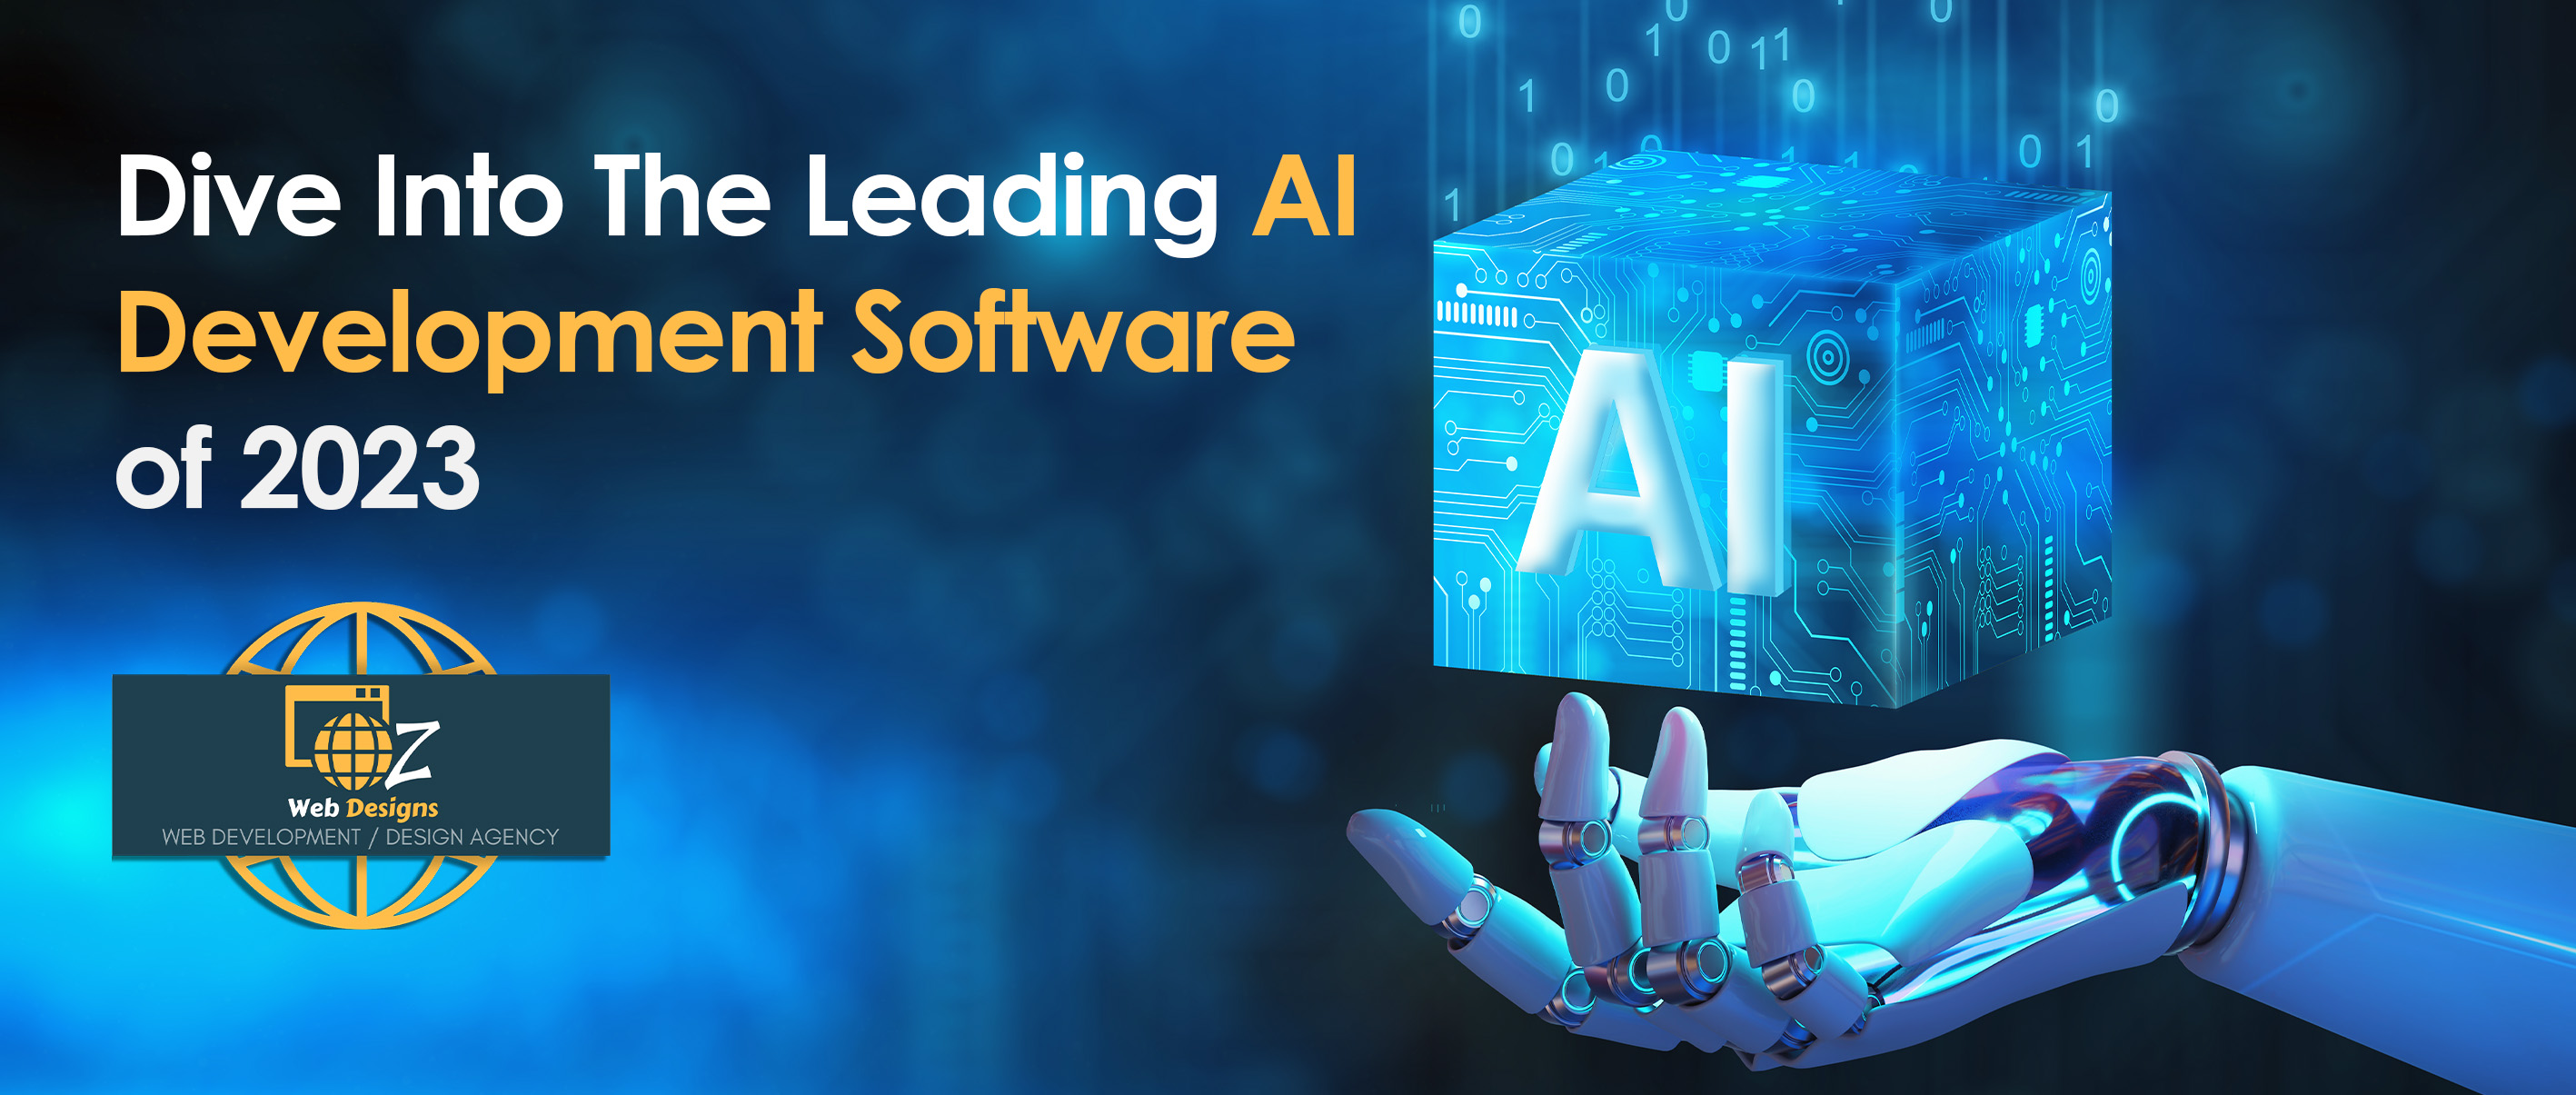 Dive into the leading AI Development Software of 2023